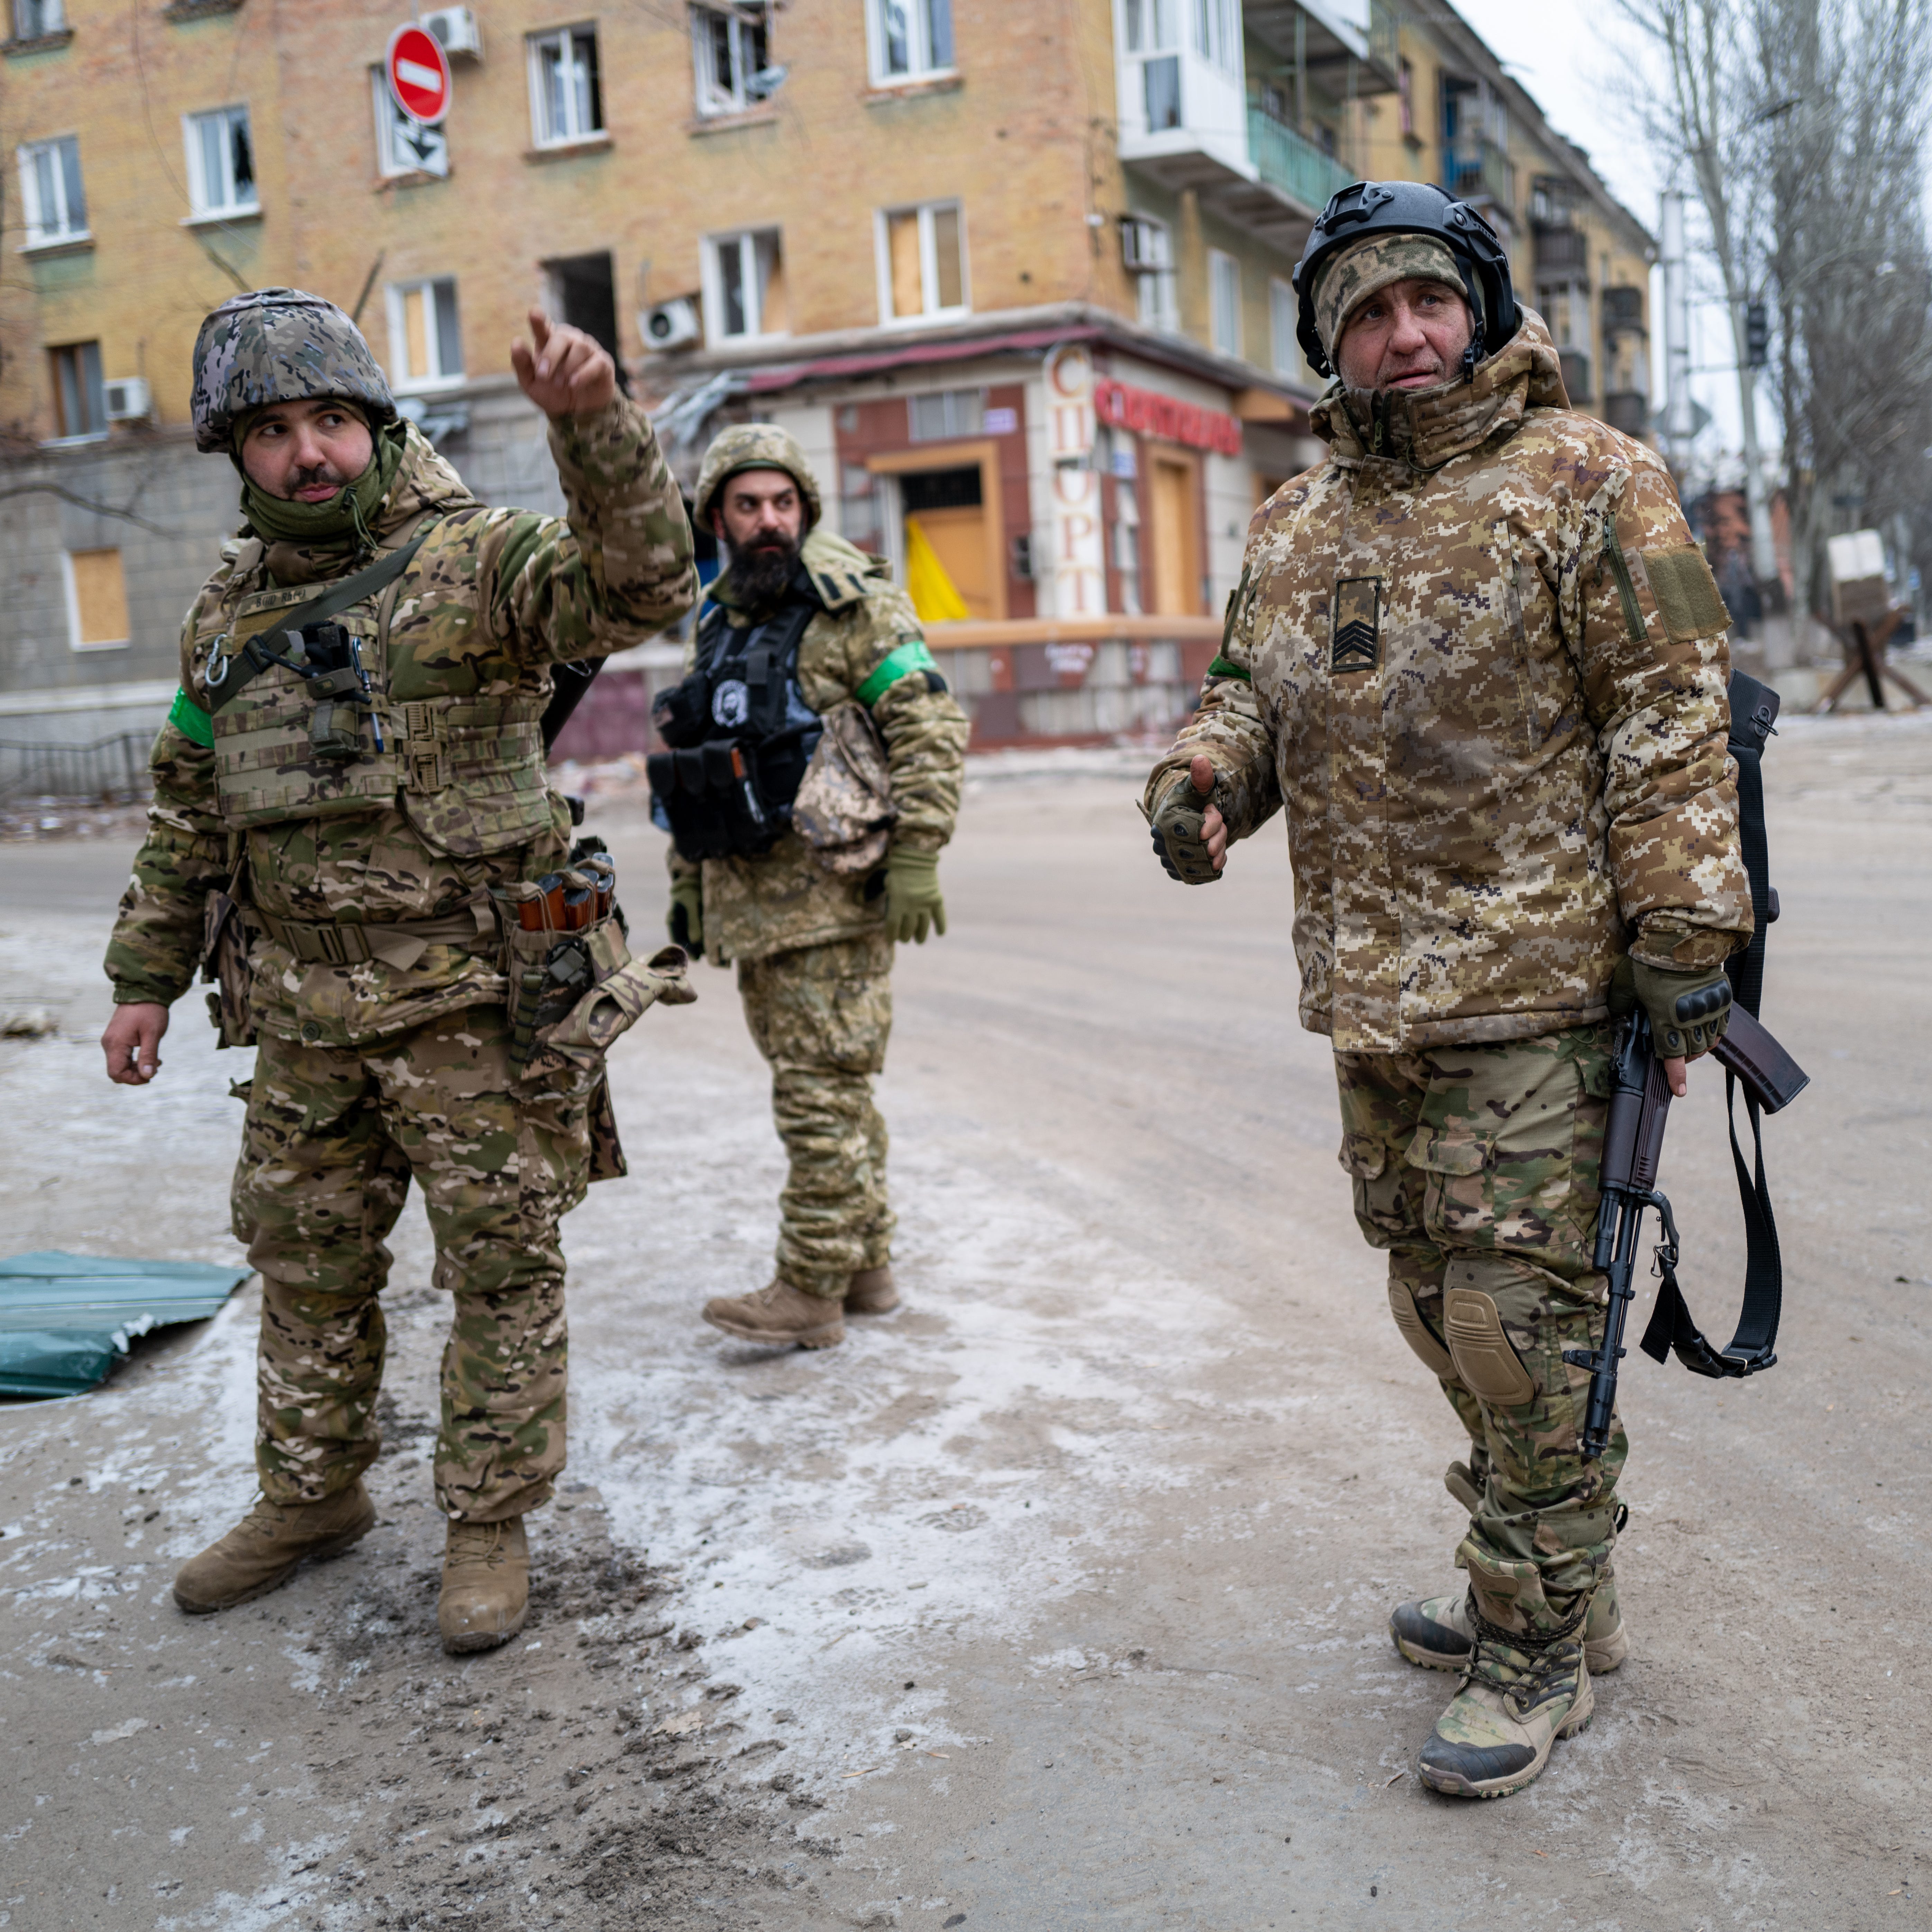 Ukrainian soldiers walk through the heavily damaged city of Bakhmut, which has become one of the most intense battles in the nearly year long war with Russia on Friday, Jan. 13, 2023. Russia has stepped up its offensive in the Donetsk region in the new year, with the region's Kyiv-appointed governor accusing Russia of using scorched-earth tactics.